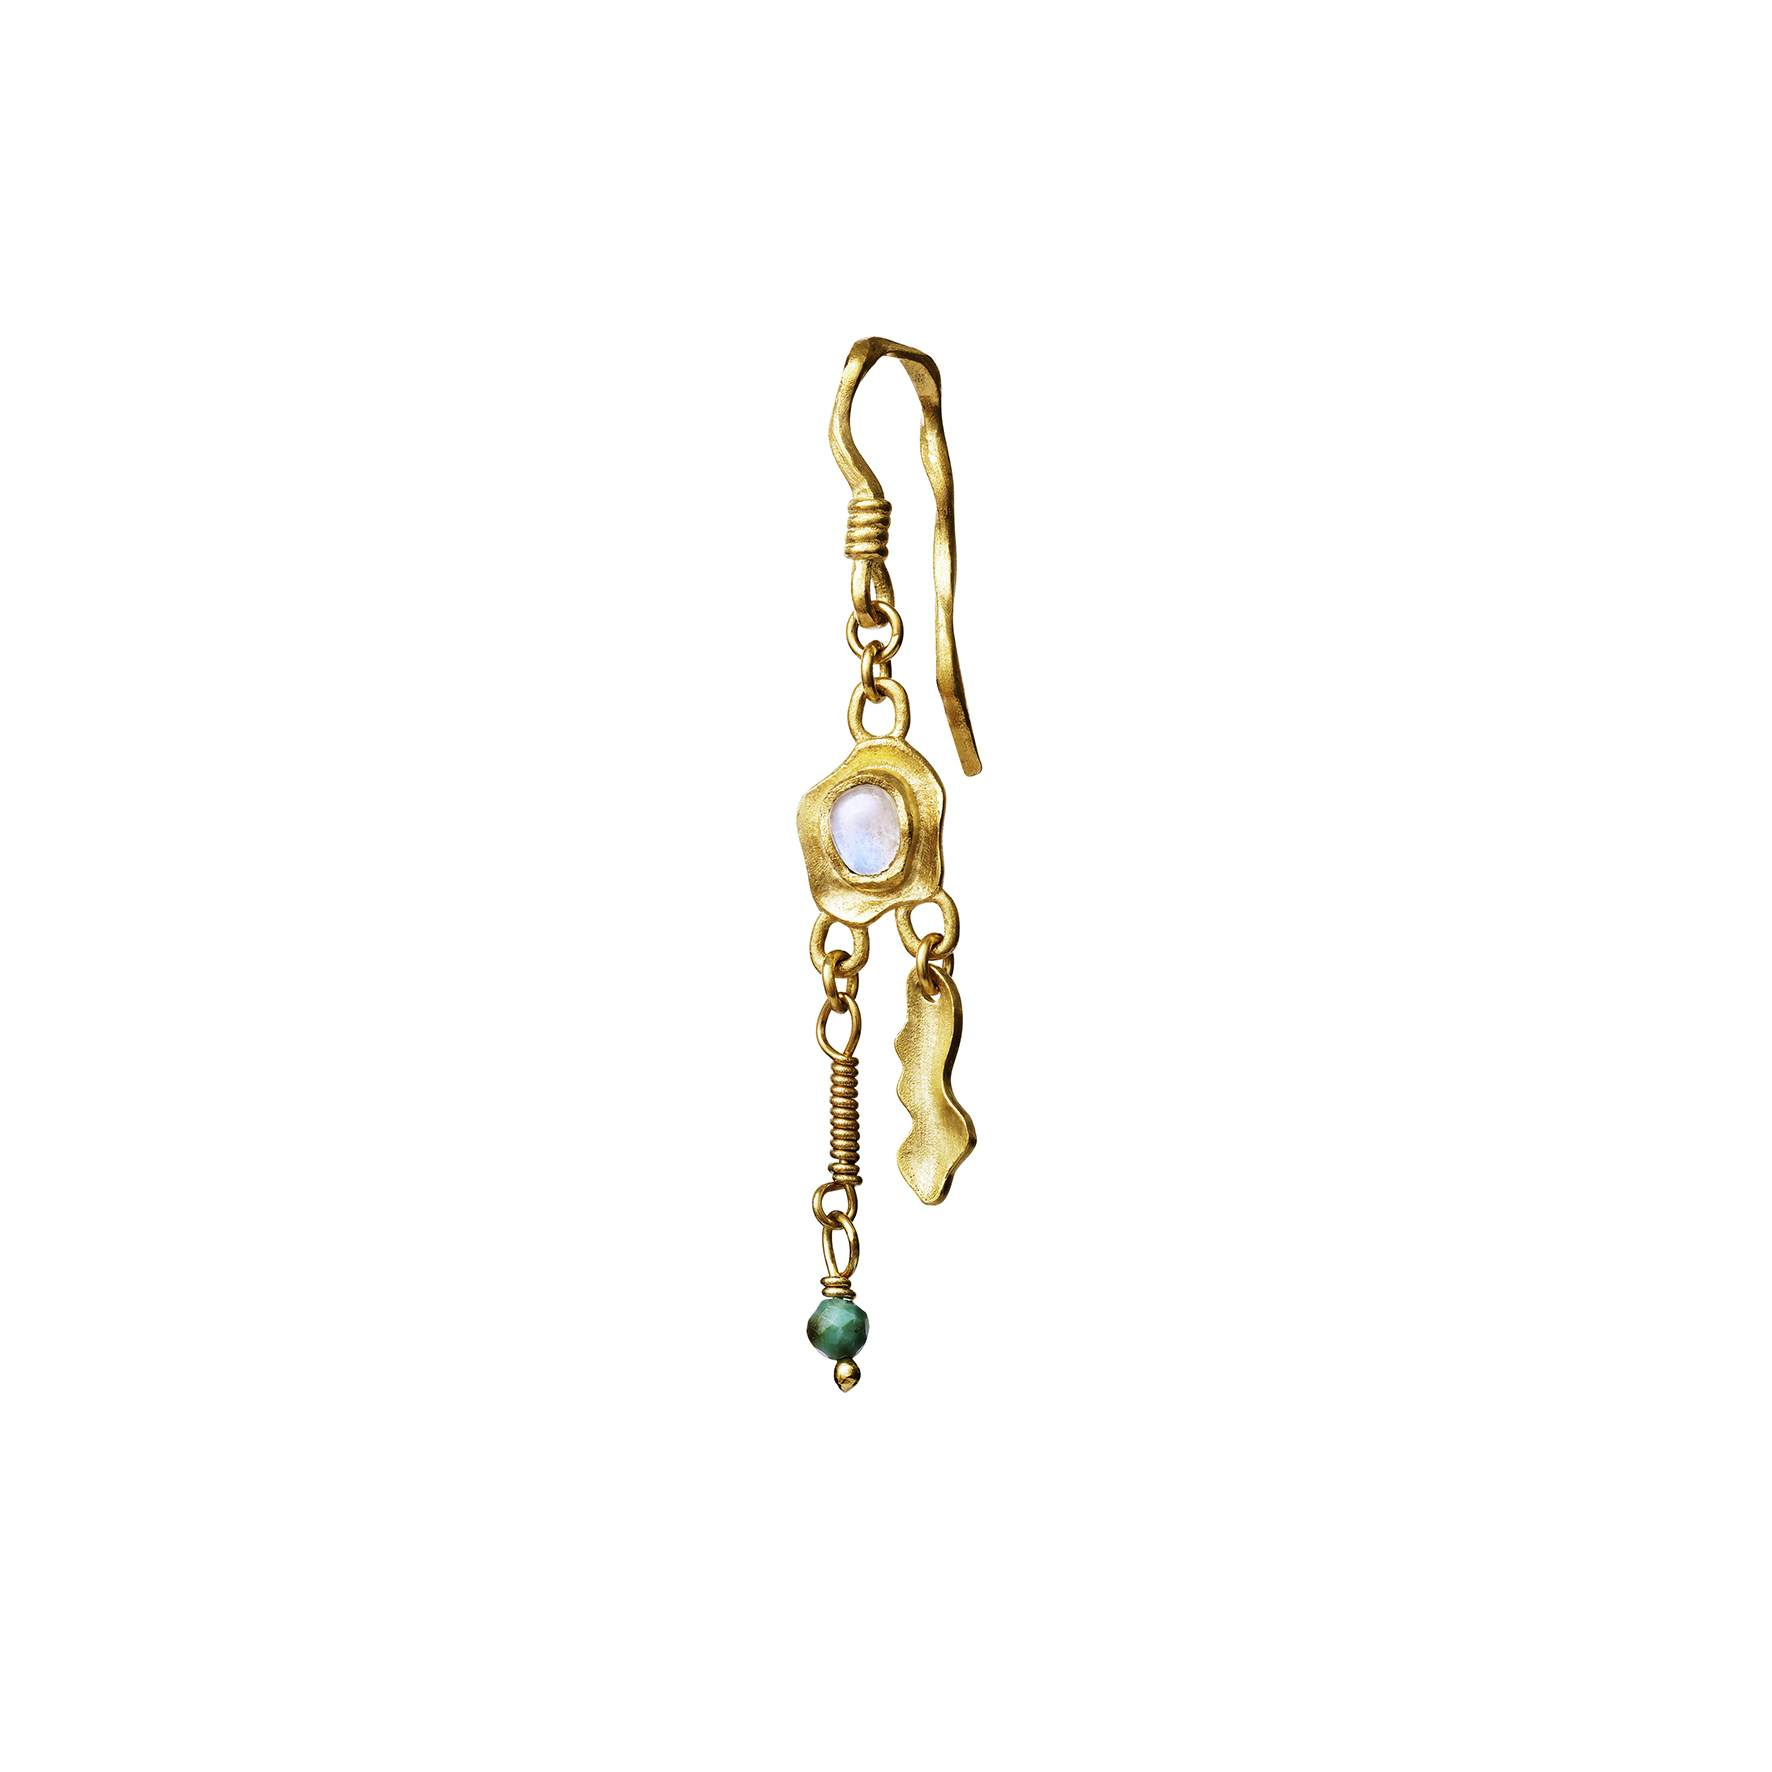 Camilla Earring from Maanesten in Goldplated-Silver Sterling 925